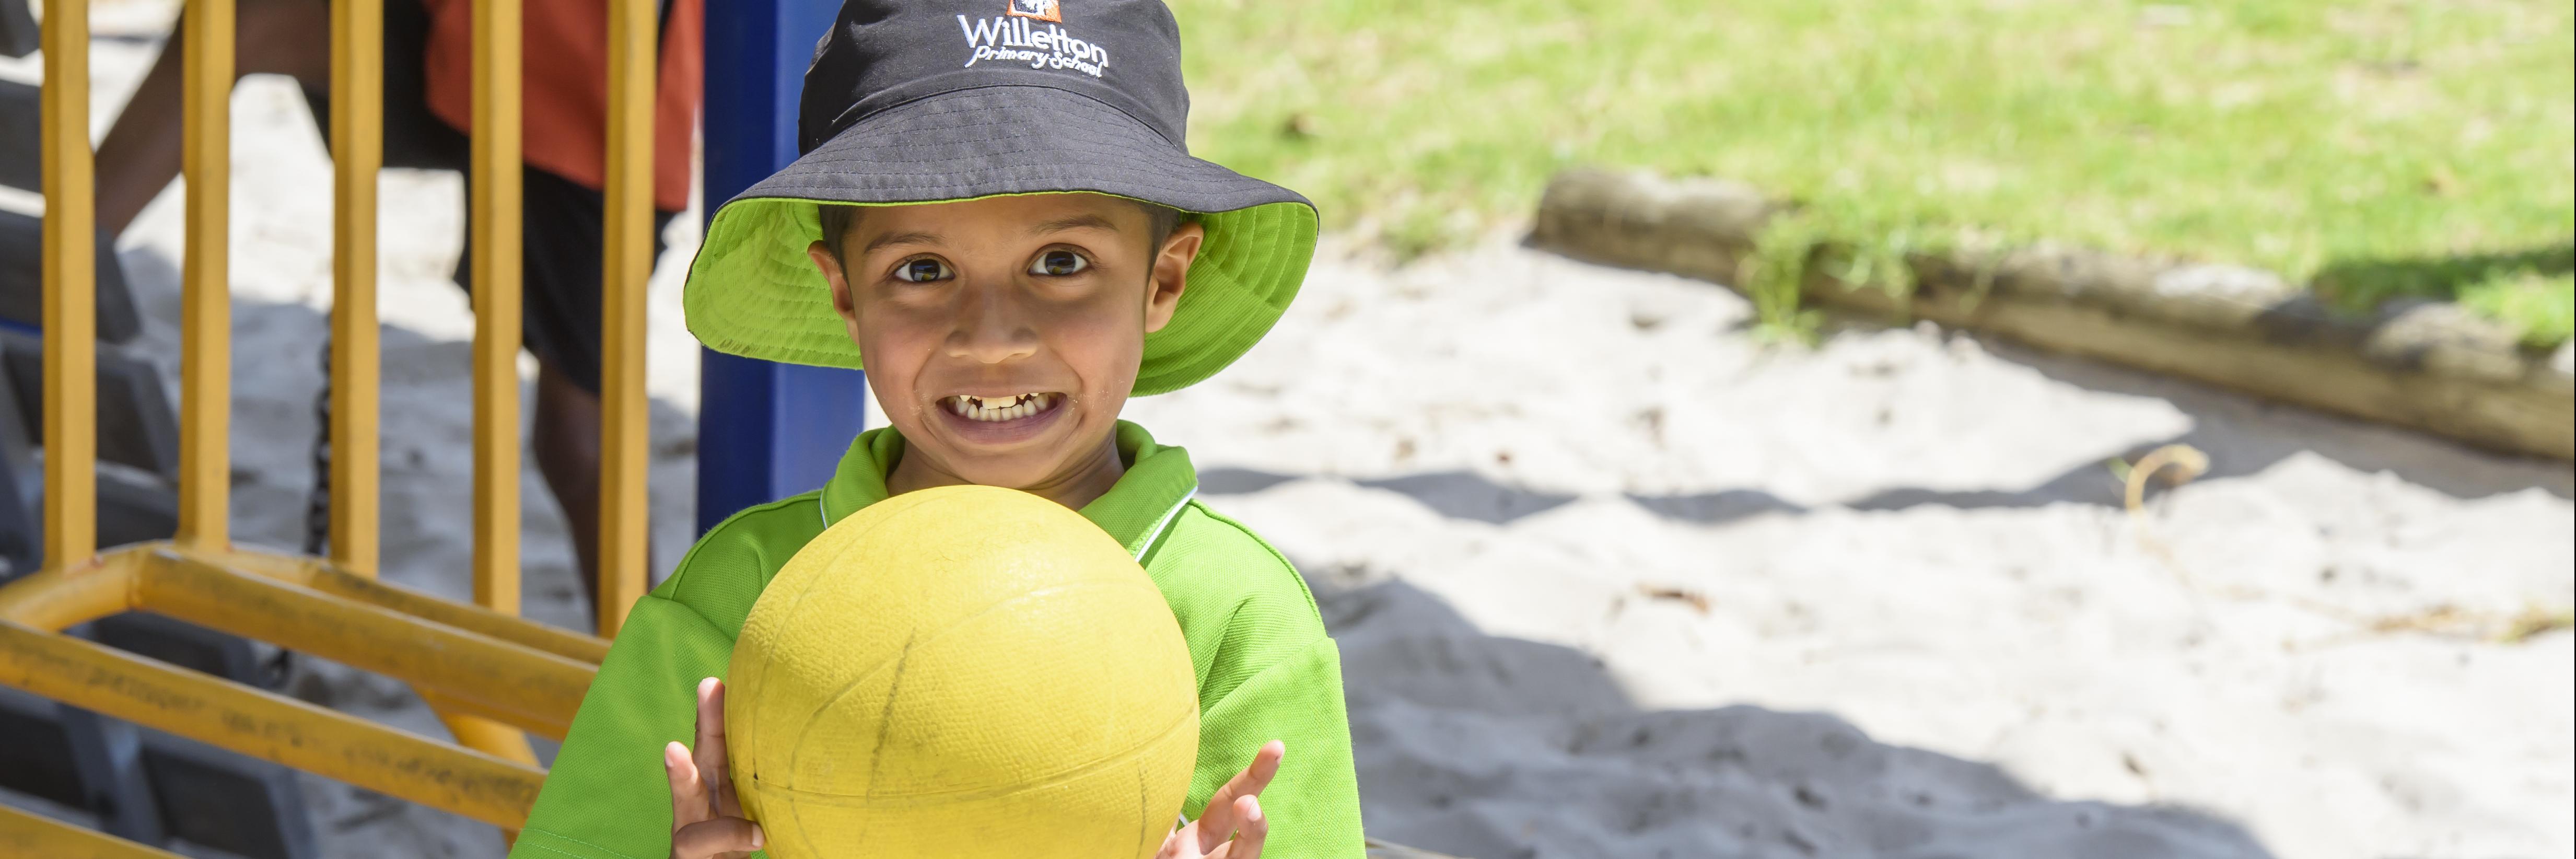 boy with green shirt and hat on holding a yellow soccer ball to his chest, smiling at camera. Playground in background of image